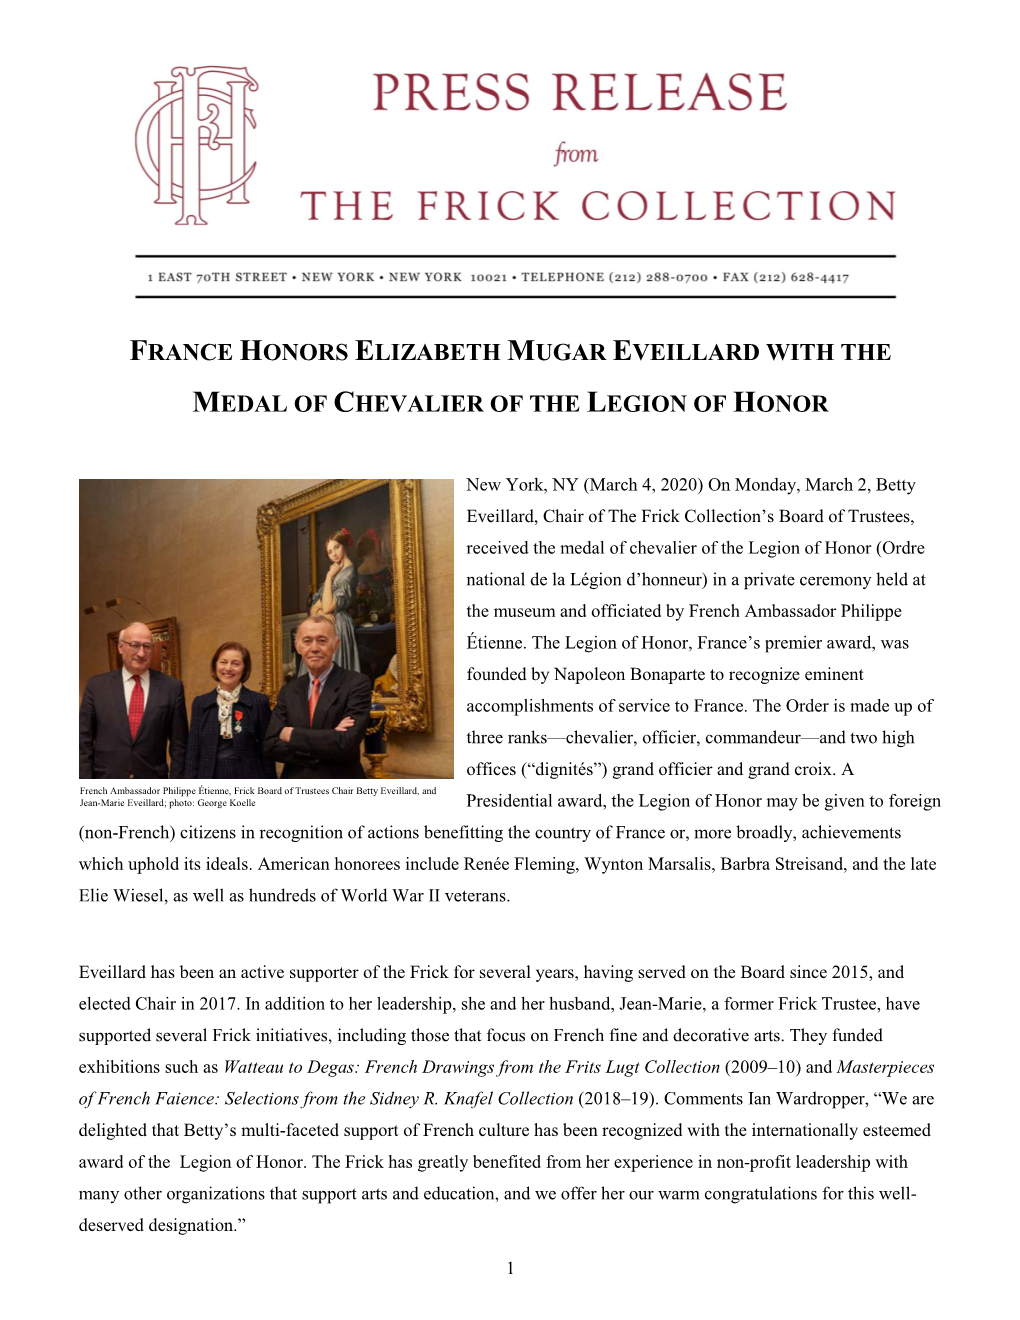 France Honors Elizabeth Mugar Eveillard with the Medal of Chevalier of the Legion of Honor